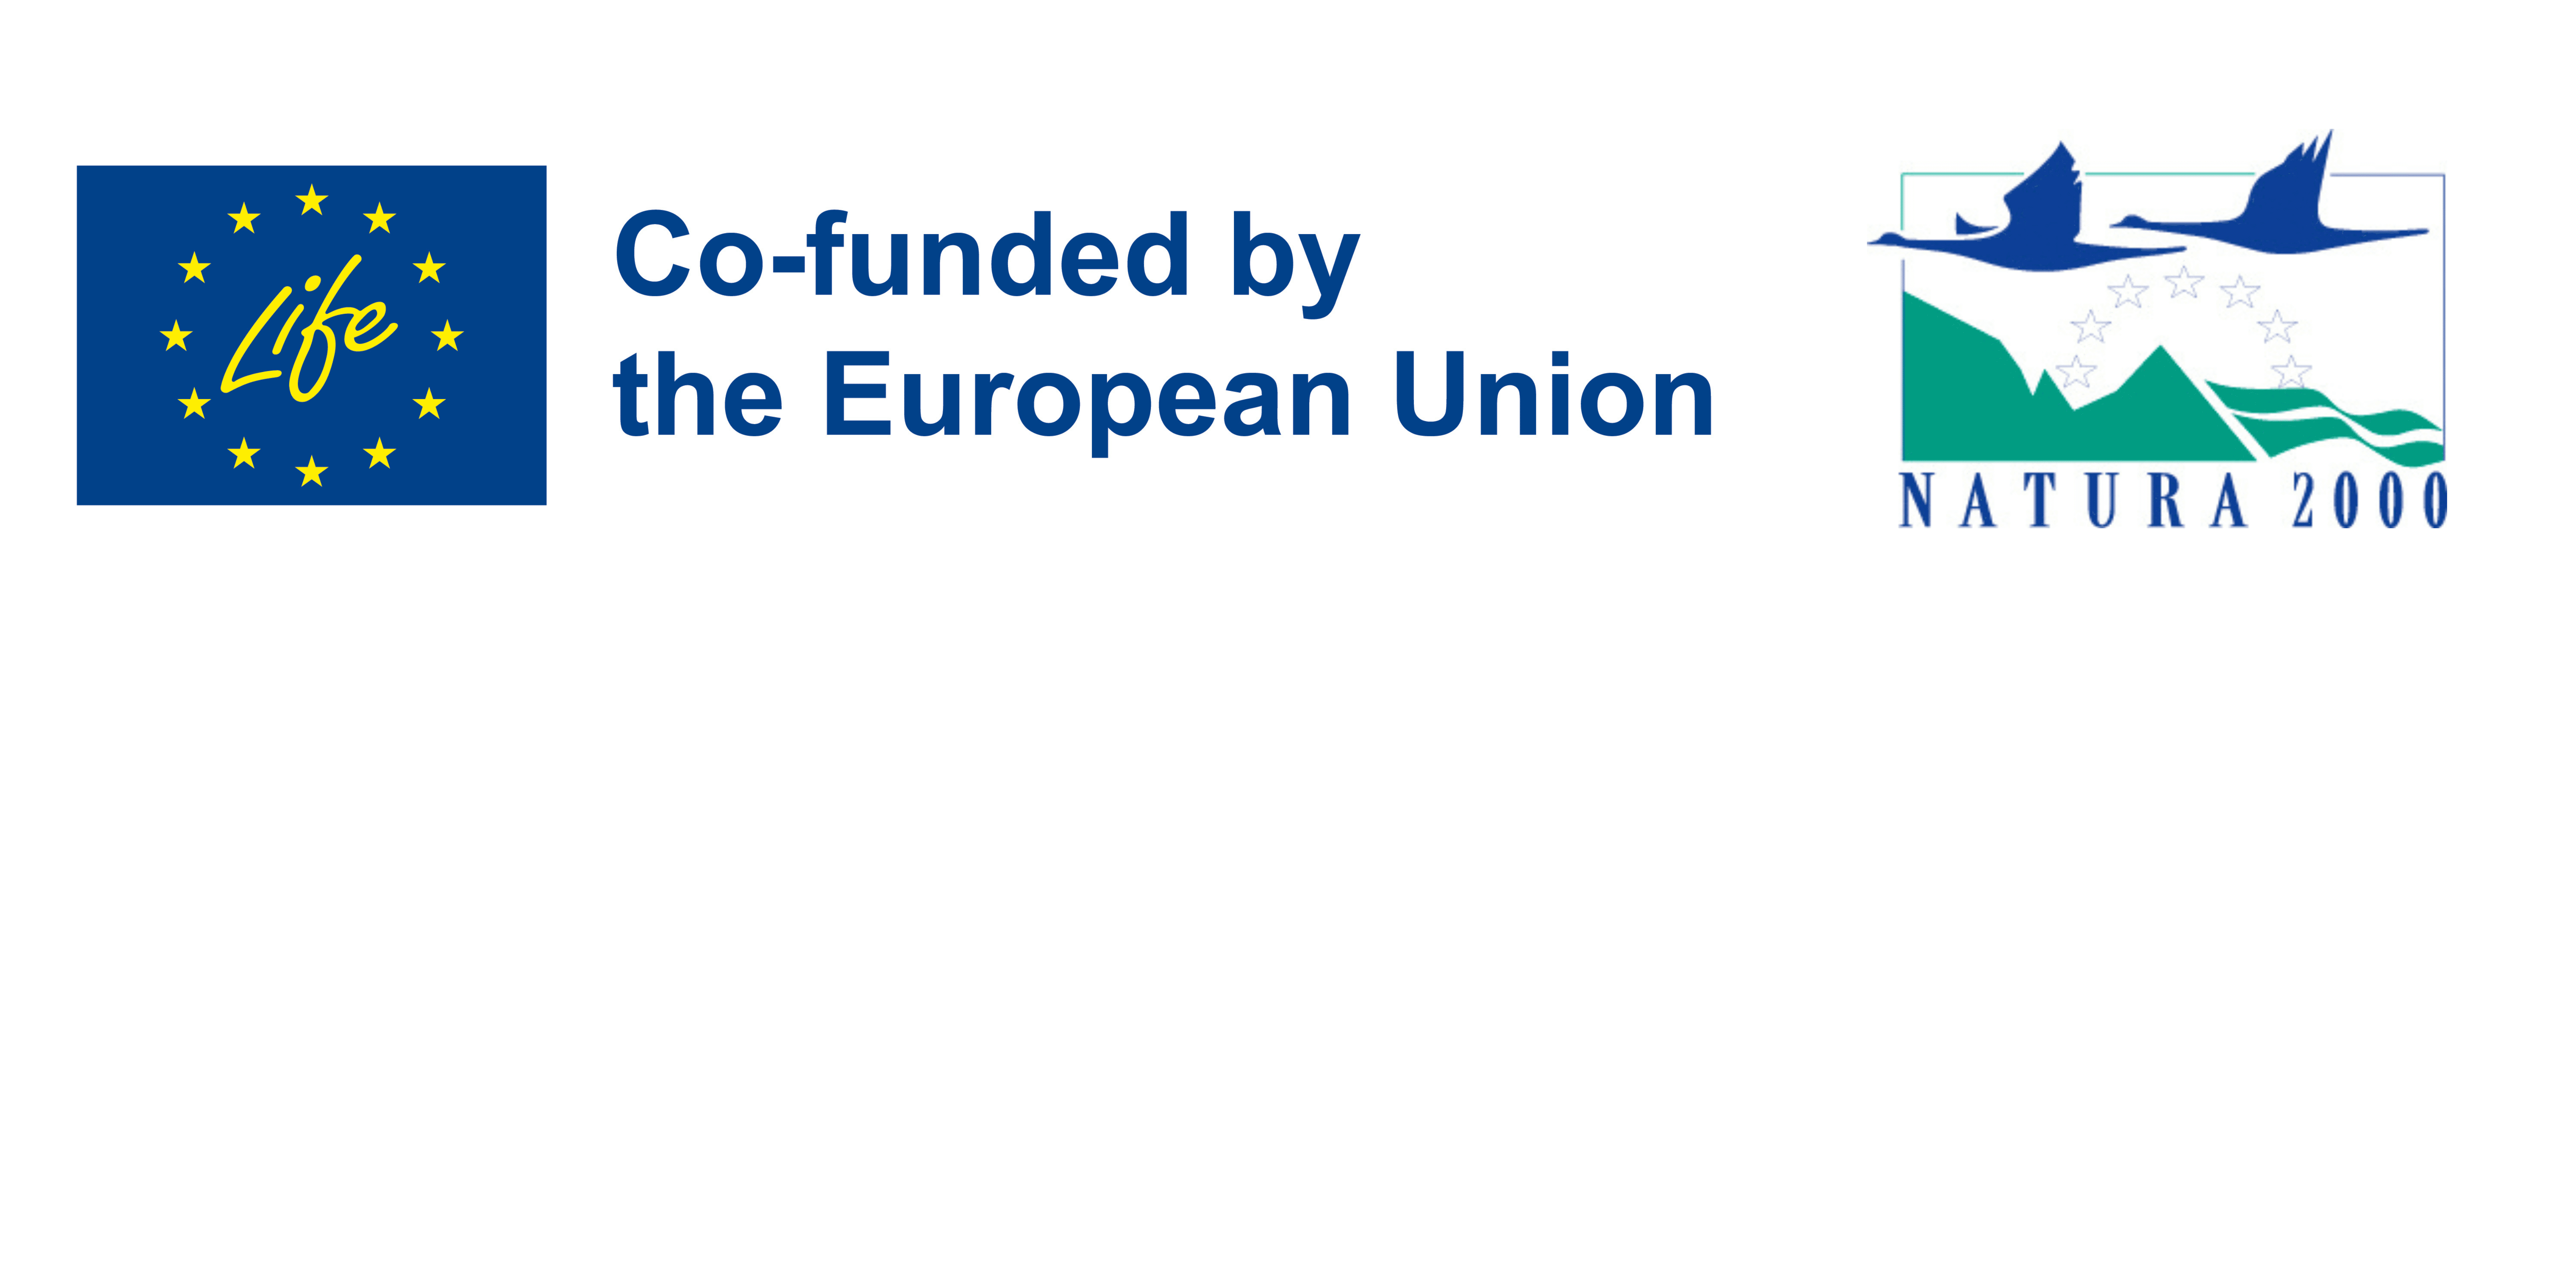 Co-funded by the European Union, NATURA 2000